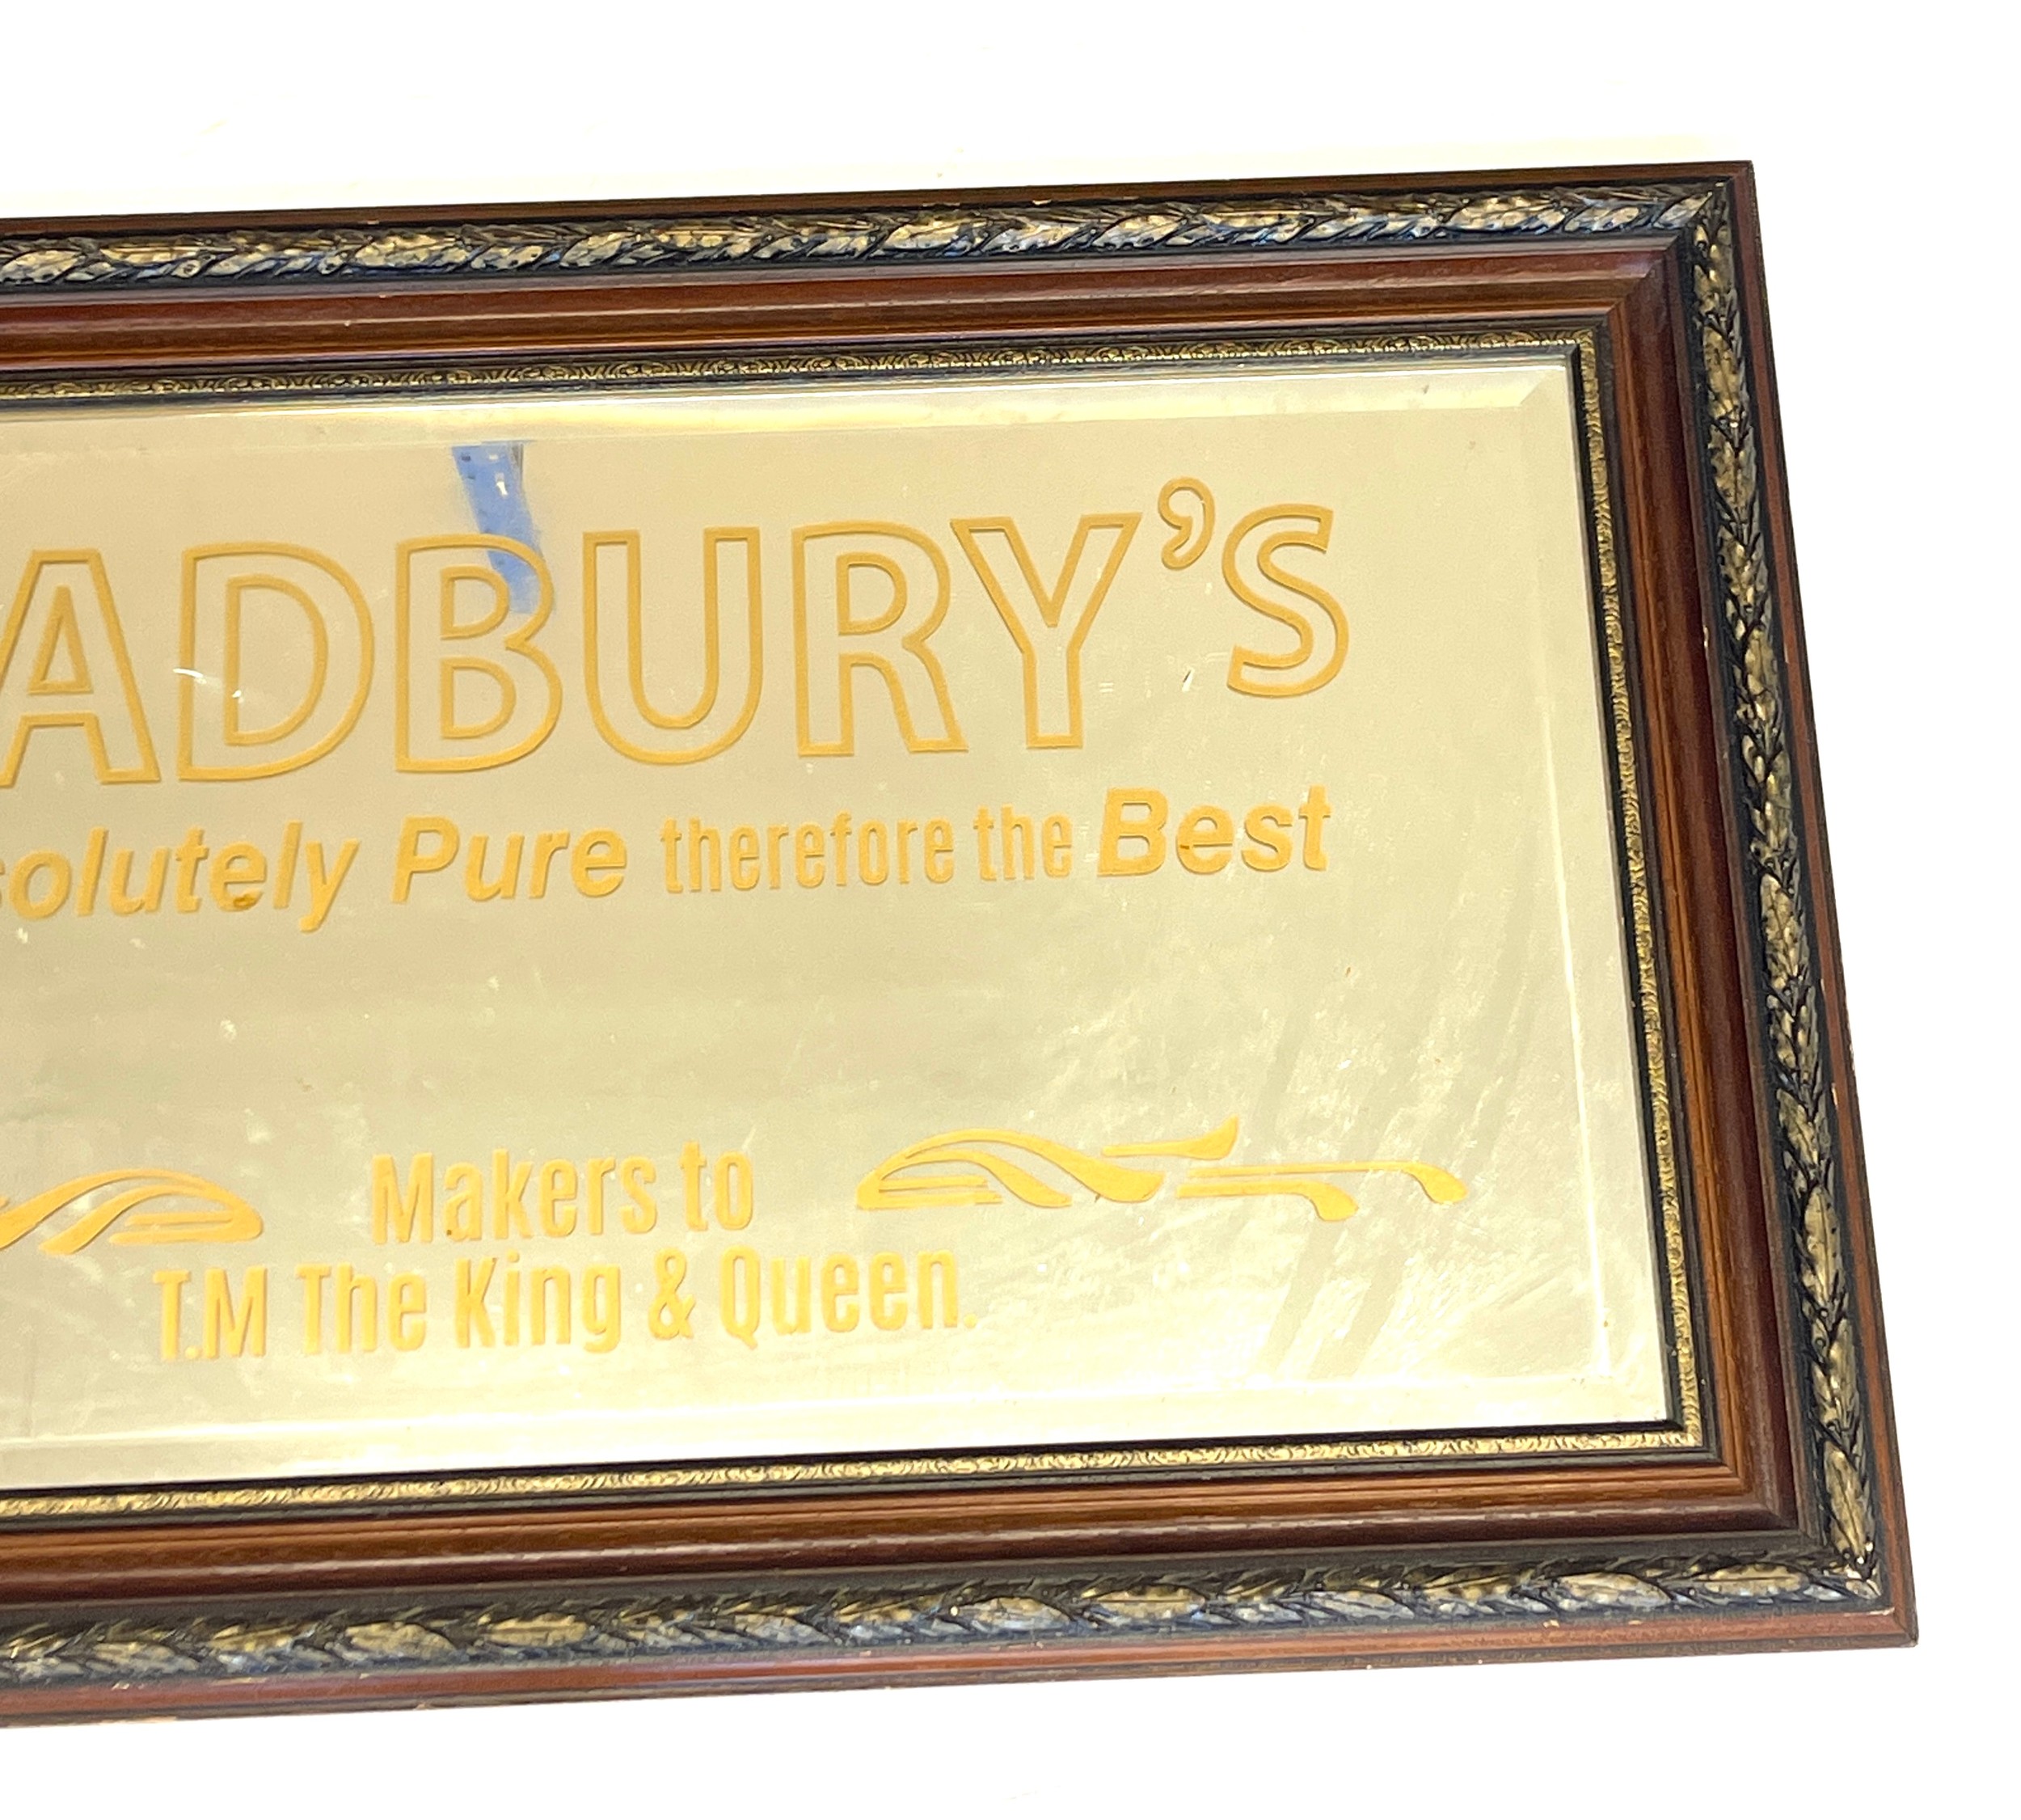 Framed advertising mirror, Cadburys absolutely pure therefore the best, Makers to the TM The King - Image 4 of 5